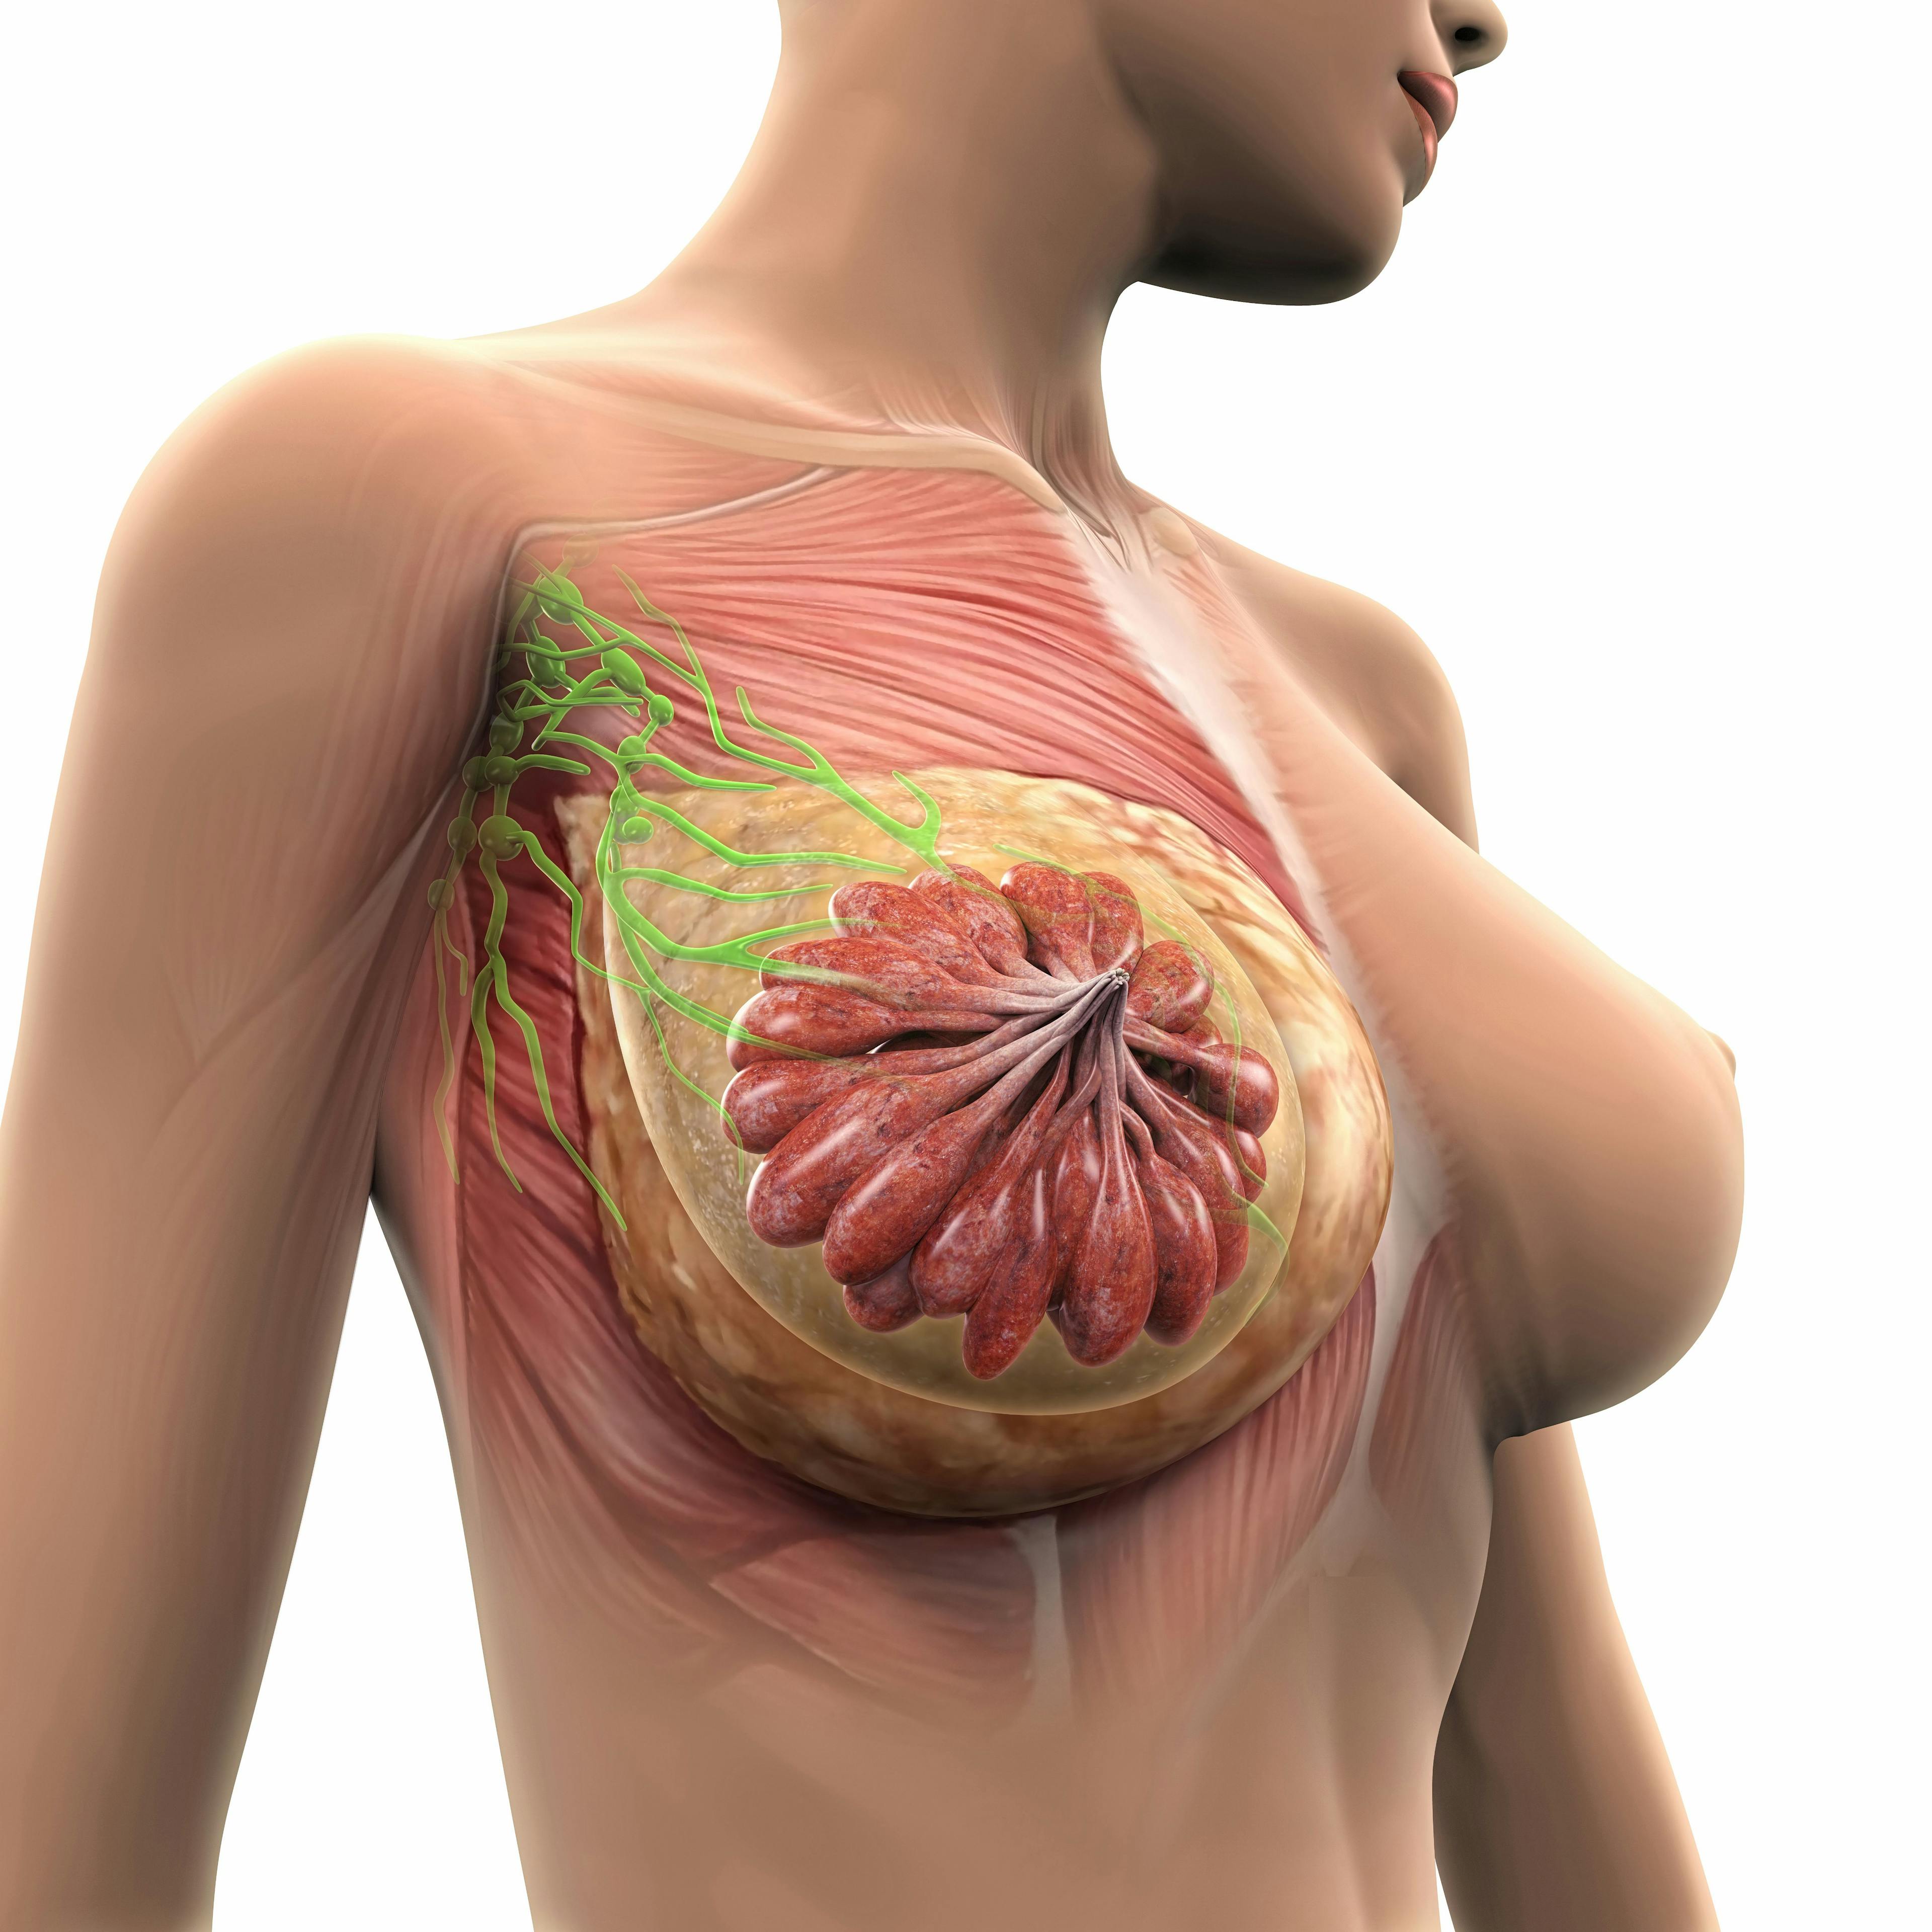 European patients with unresectable or metastatic HER2-positive breast cancer are now able to receive treatment with trastuzumab deruxtecan following 1 or more previous anti-HER2 regimens.